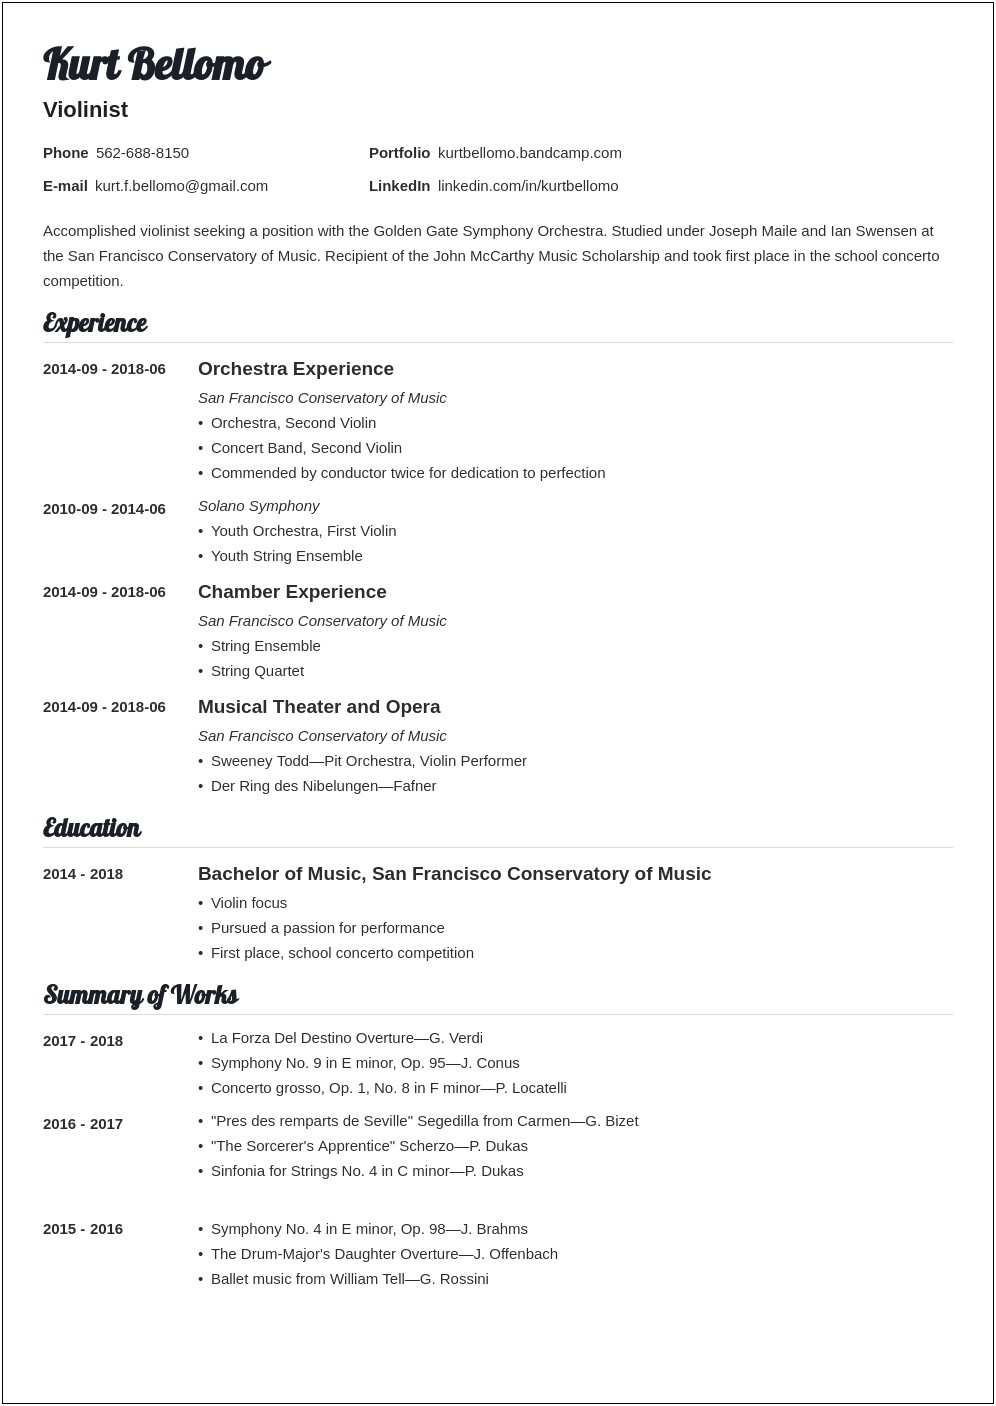 Resume Summary Example For Music Industry